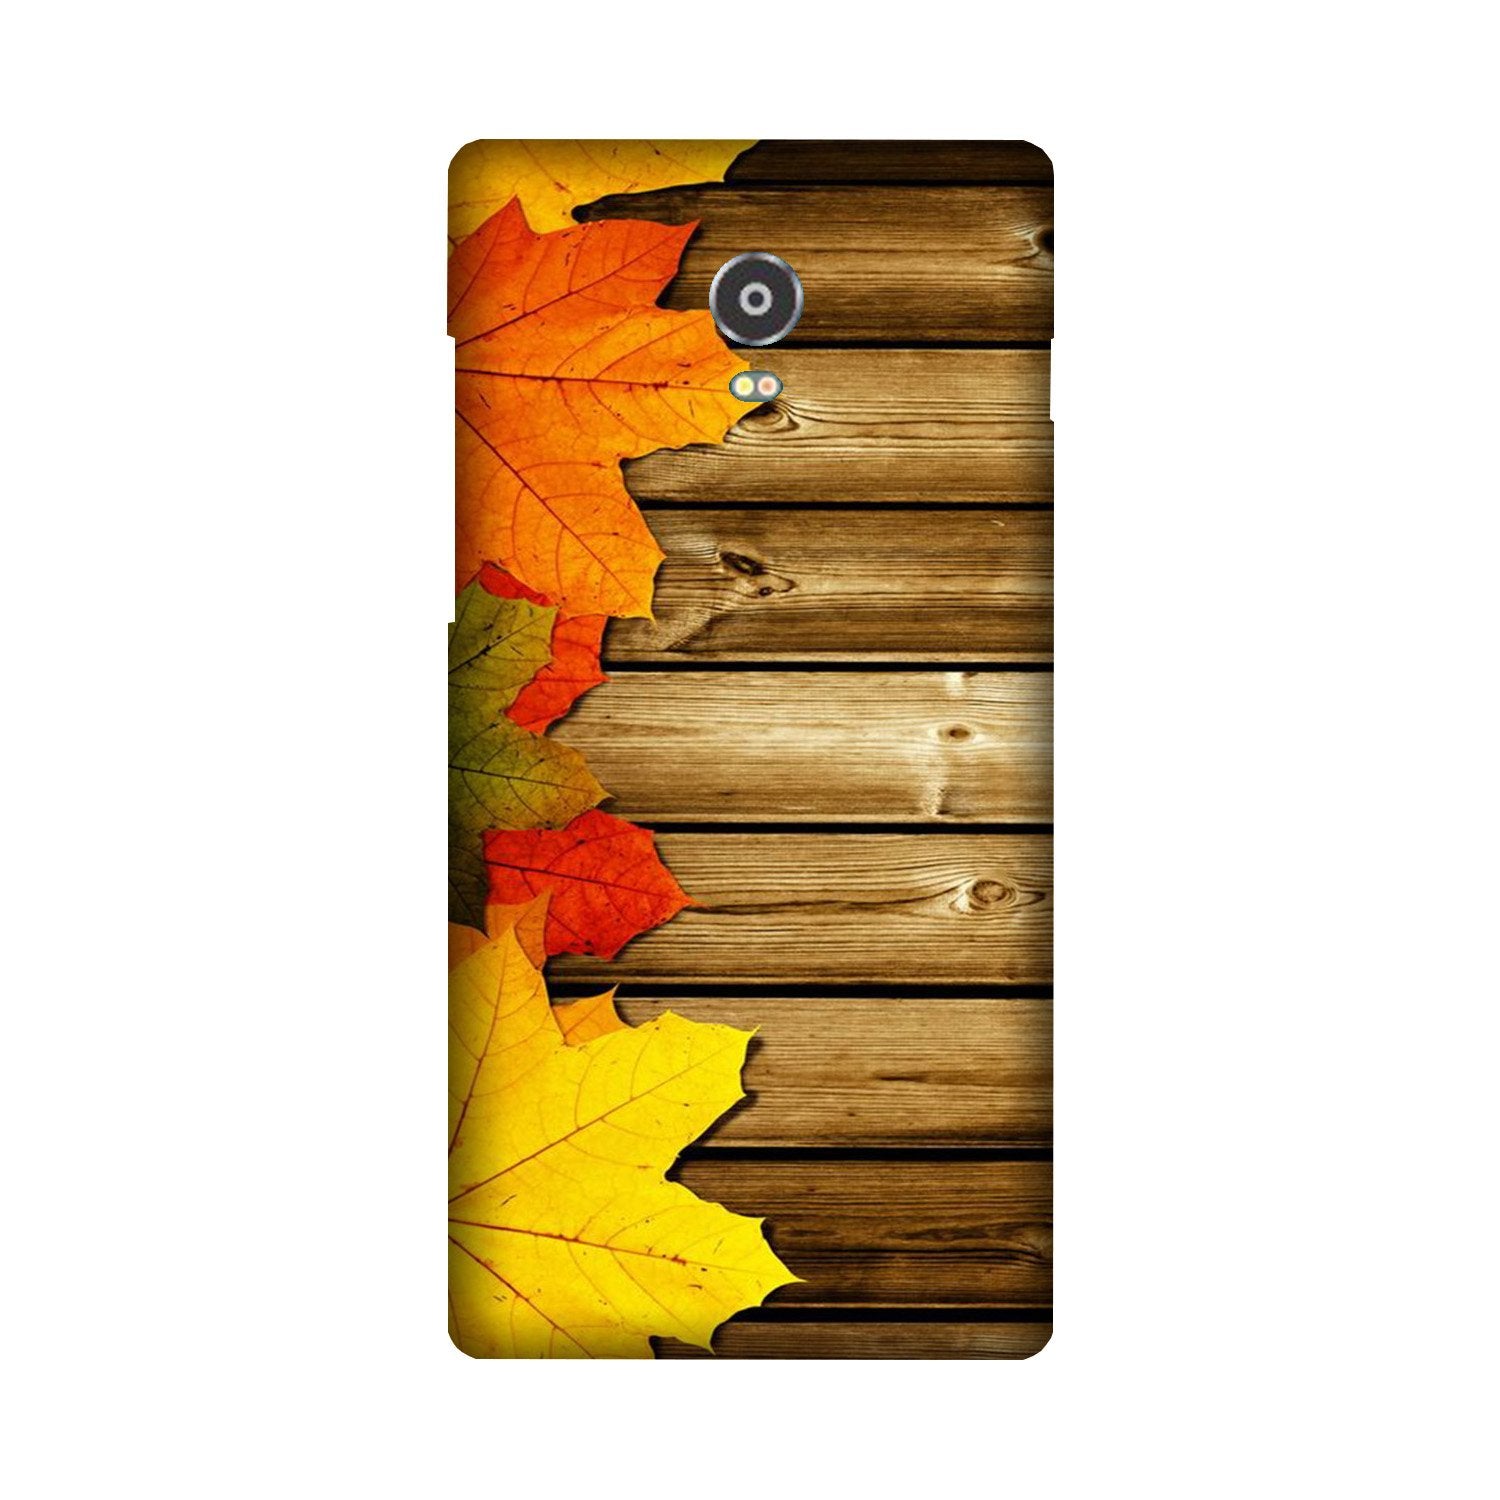 Wooden look3 Case for Lenovo Vibe P1